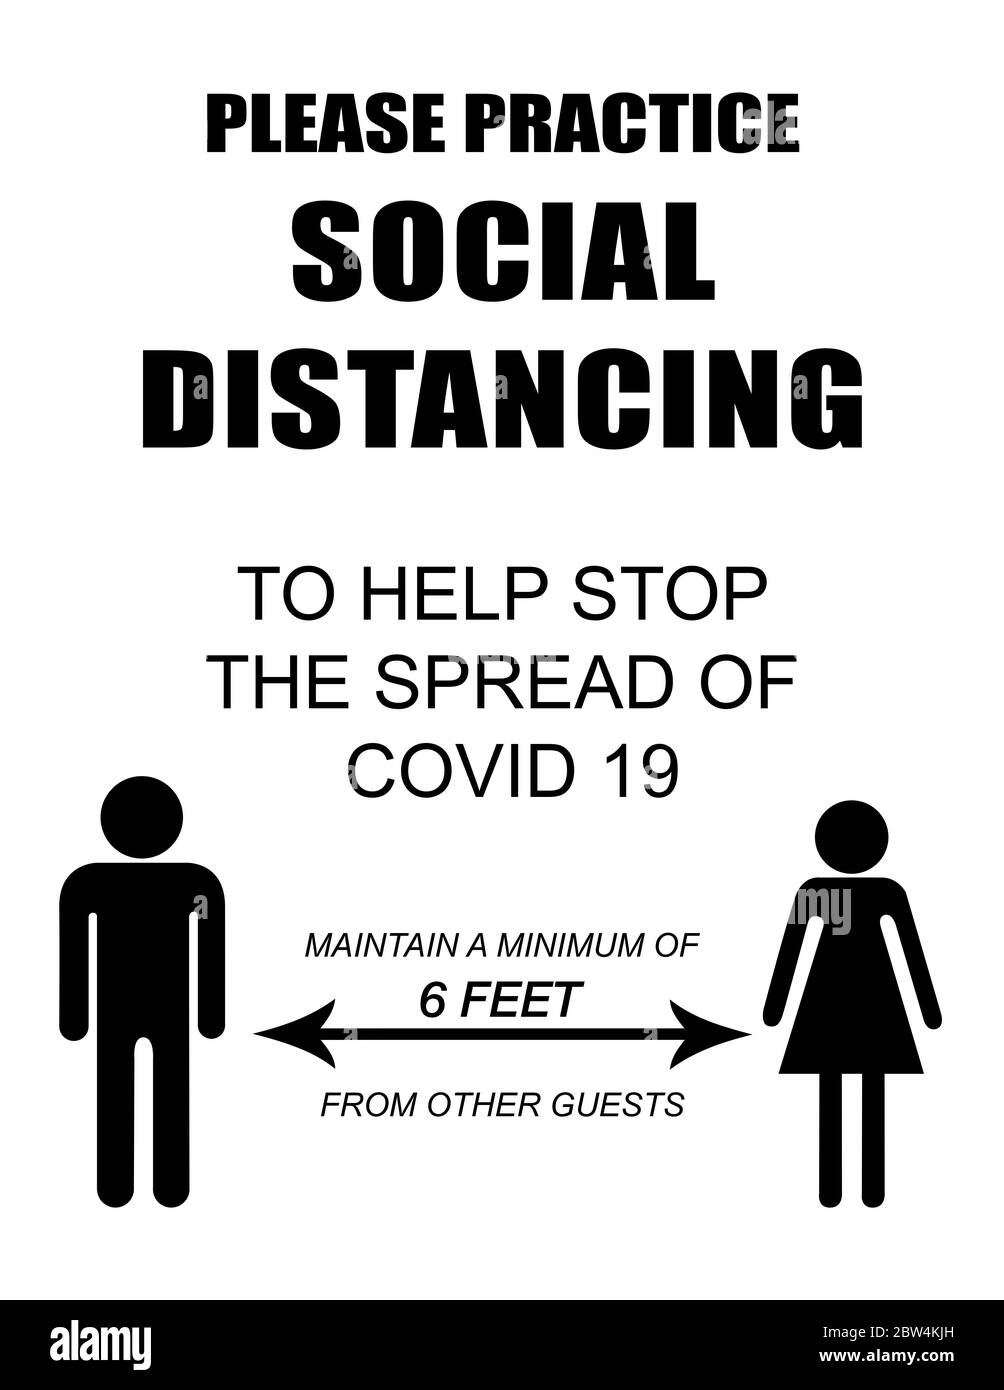 Maintain Social Distancing to Help Stop the Spread of COVID-19 - Illustration Poster Stock Photo